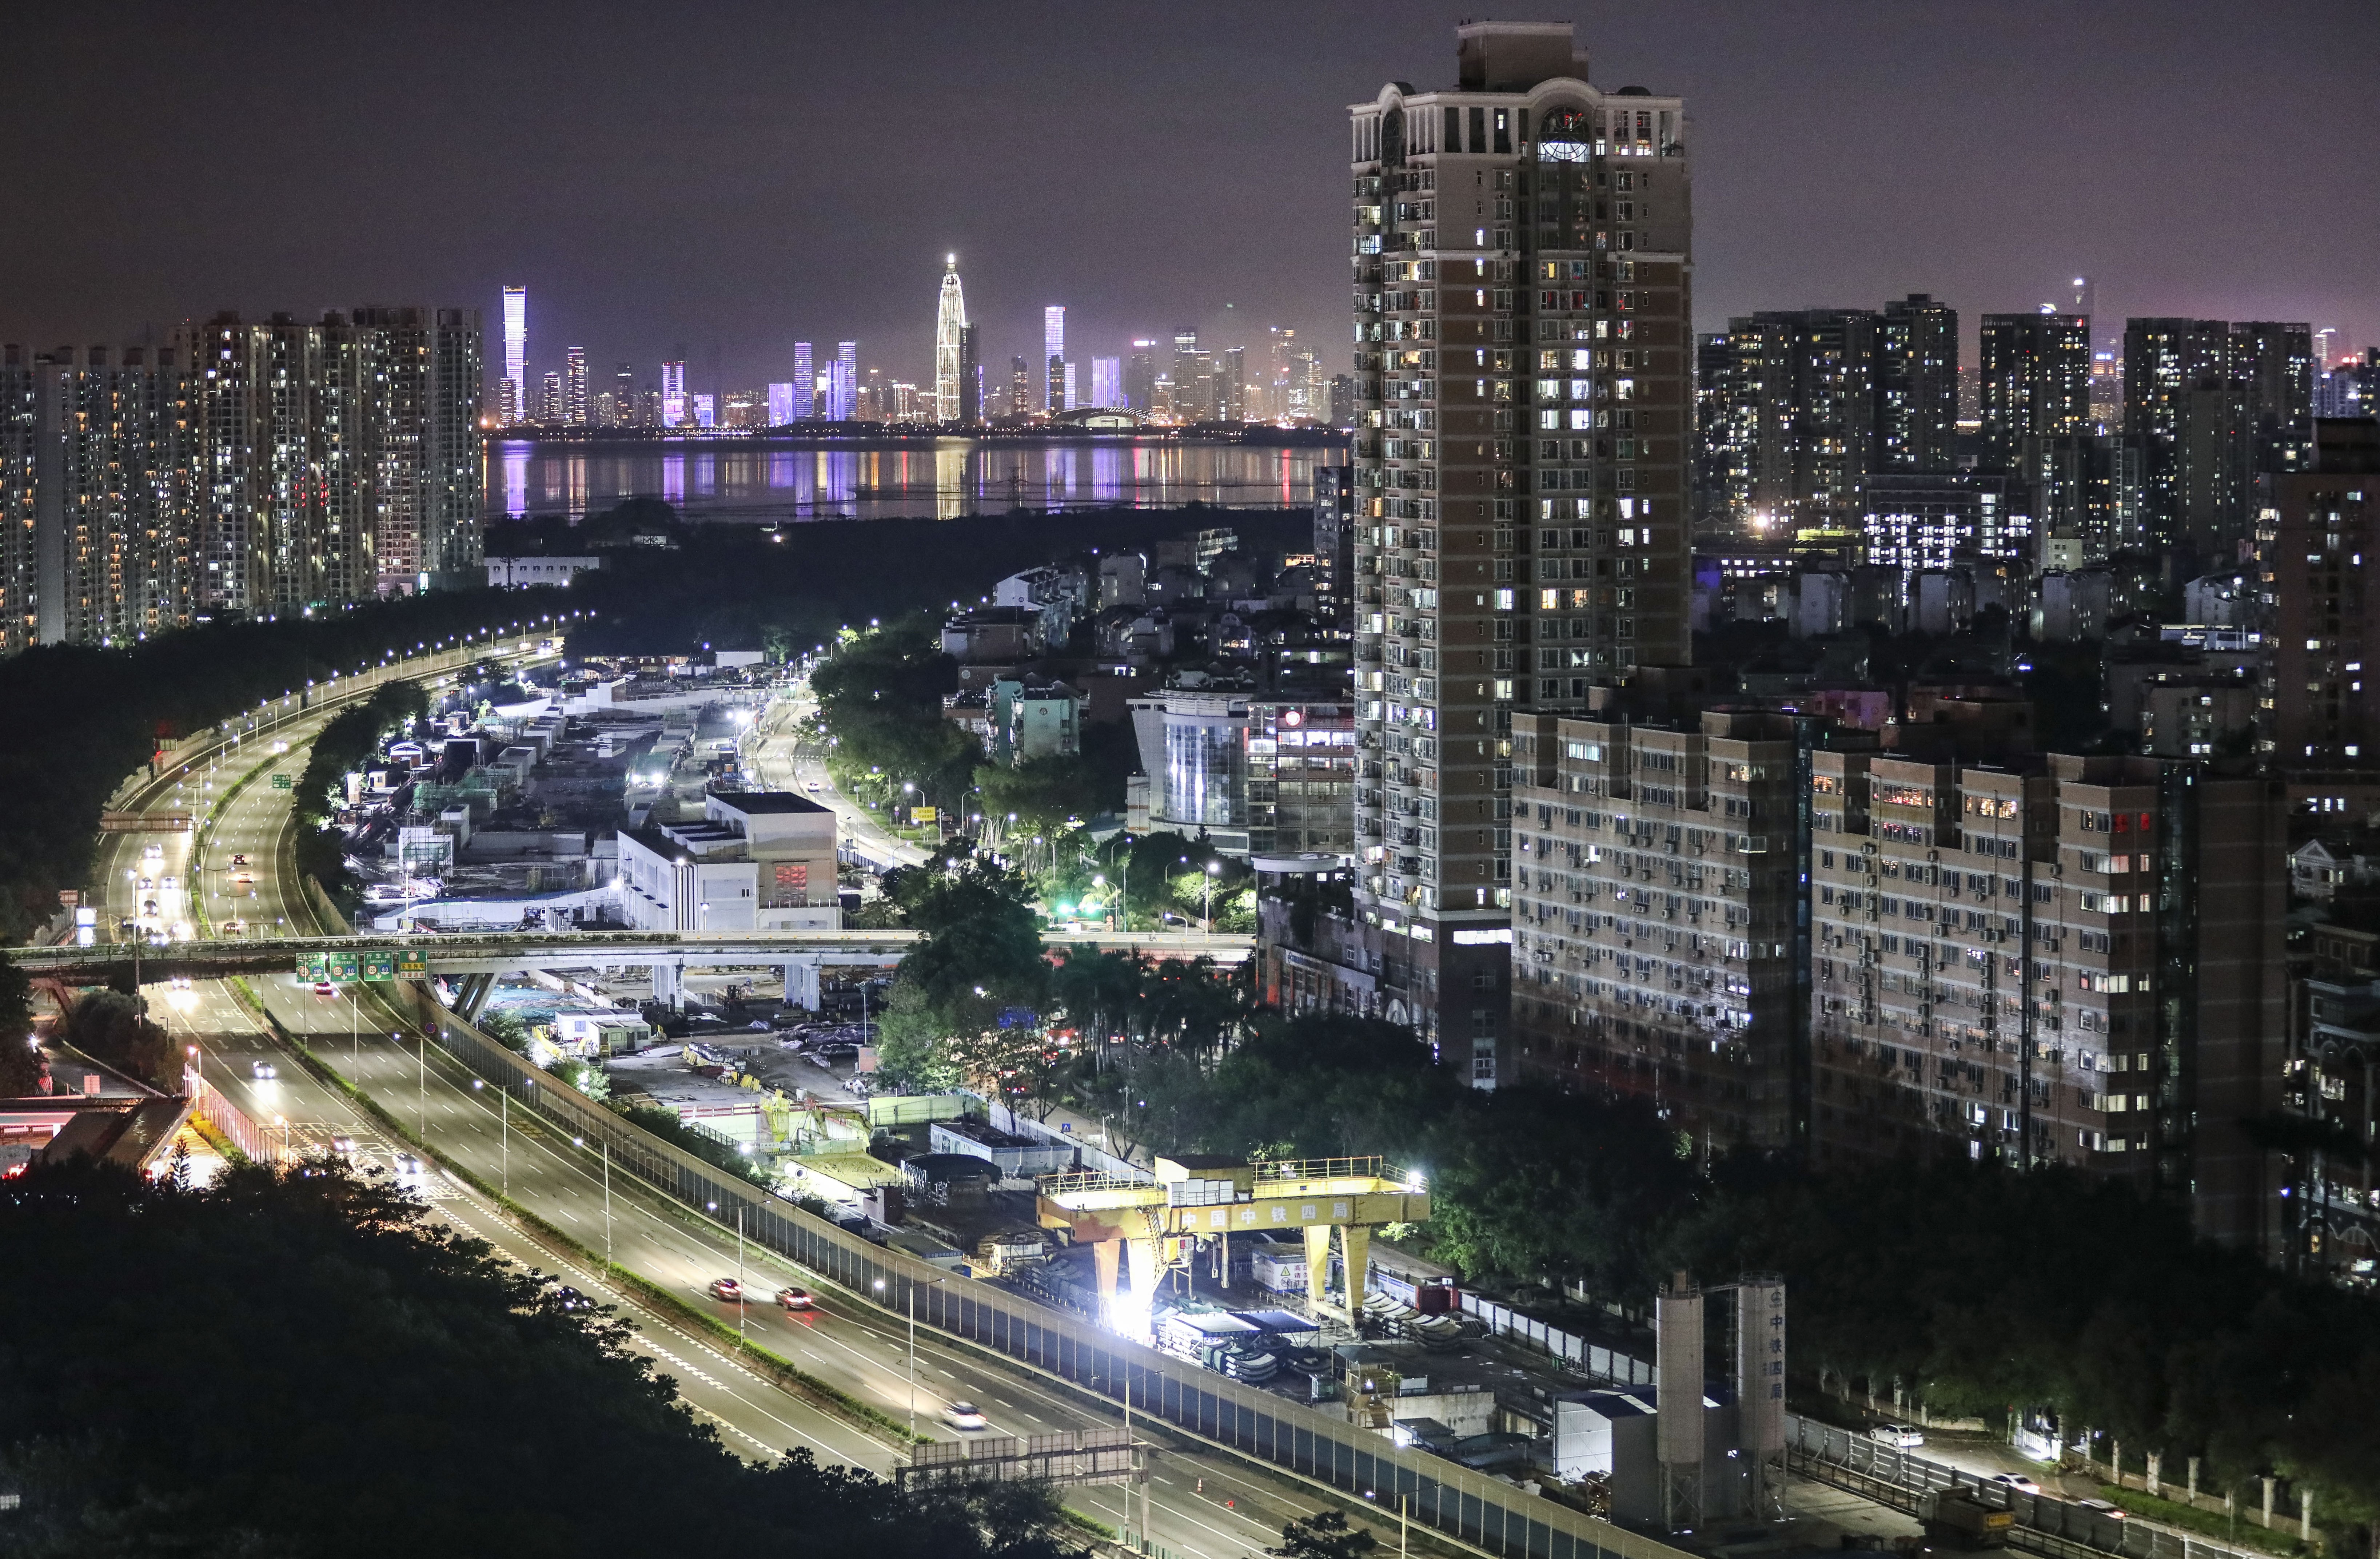 A night view of the Beijing-Hong Kong-Macau expressway from Futian in Shenzhen, which is one of 11 cities in the Greater Bay Area project. Photo: Roy Issa